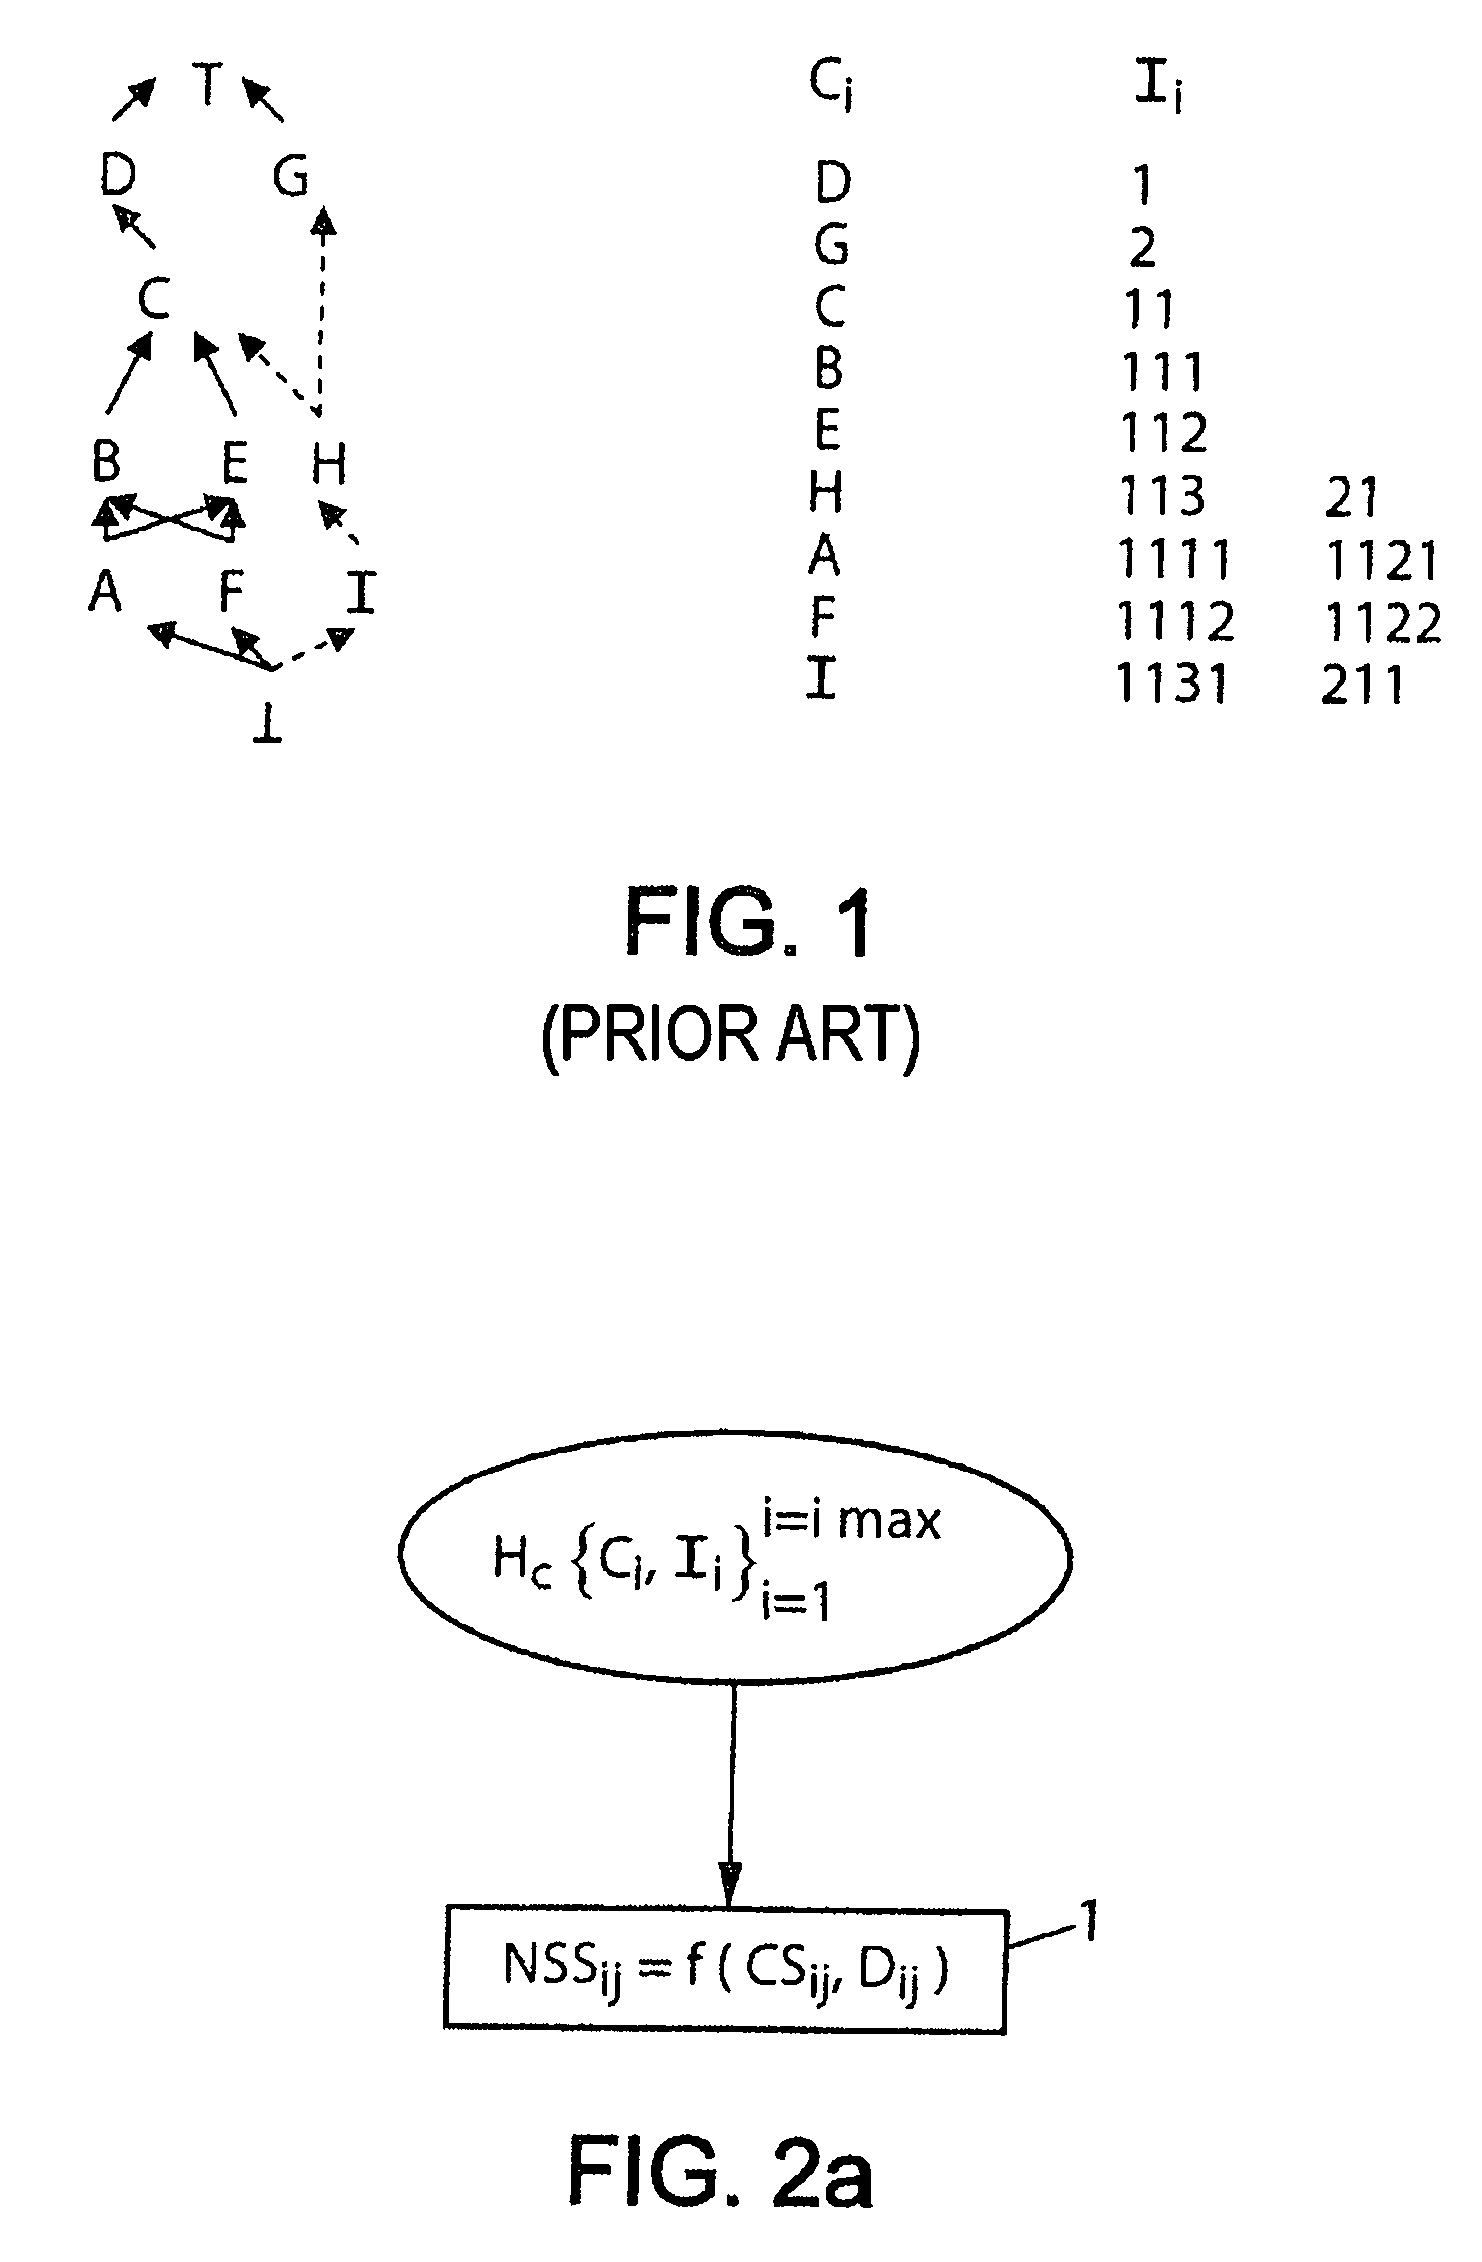 Method and device for encoding a score of semantic and spatial similarity between concepts of an ontology stored in hierarchically numbered trellis form